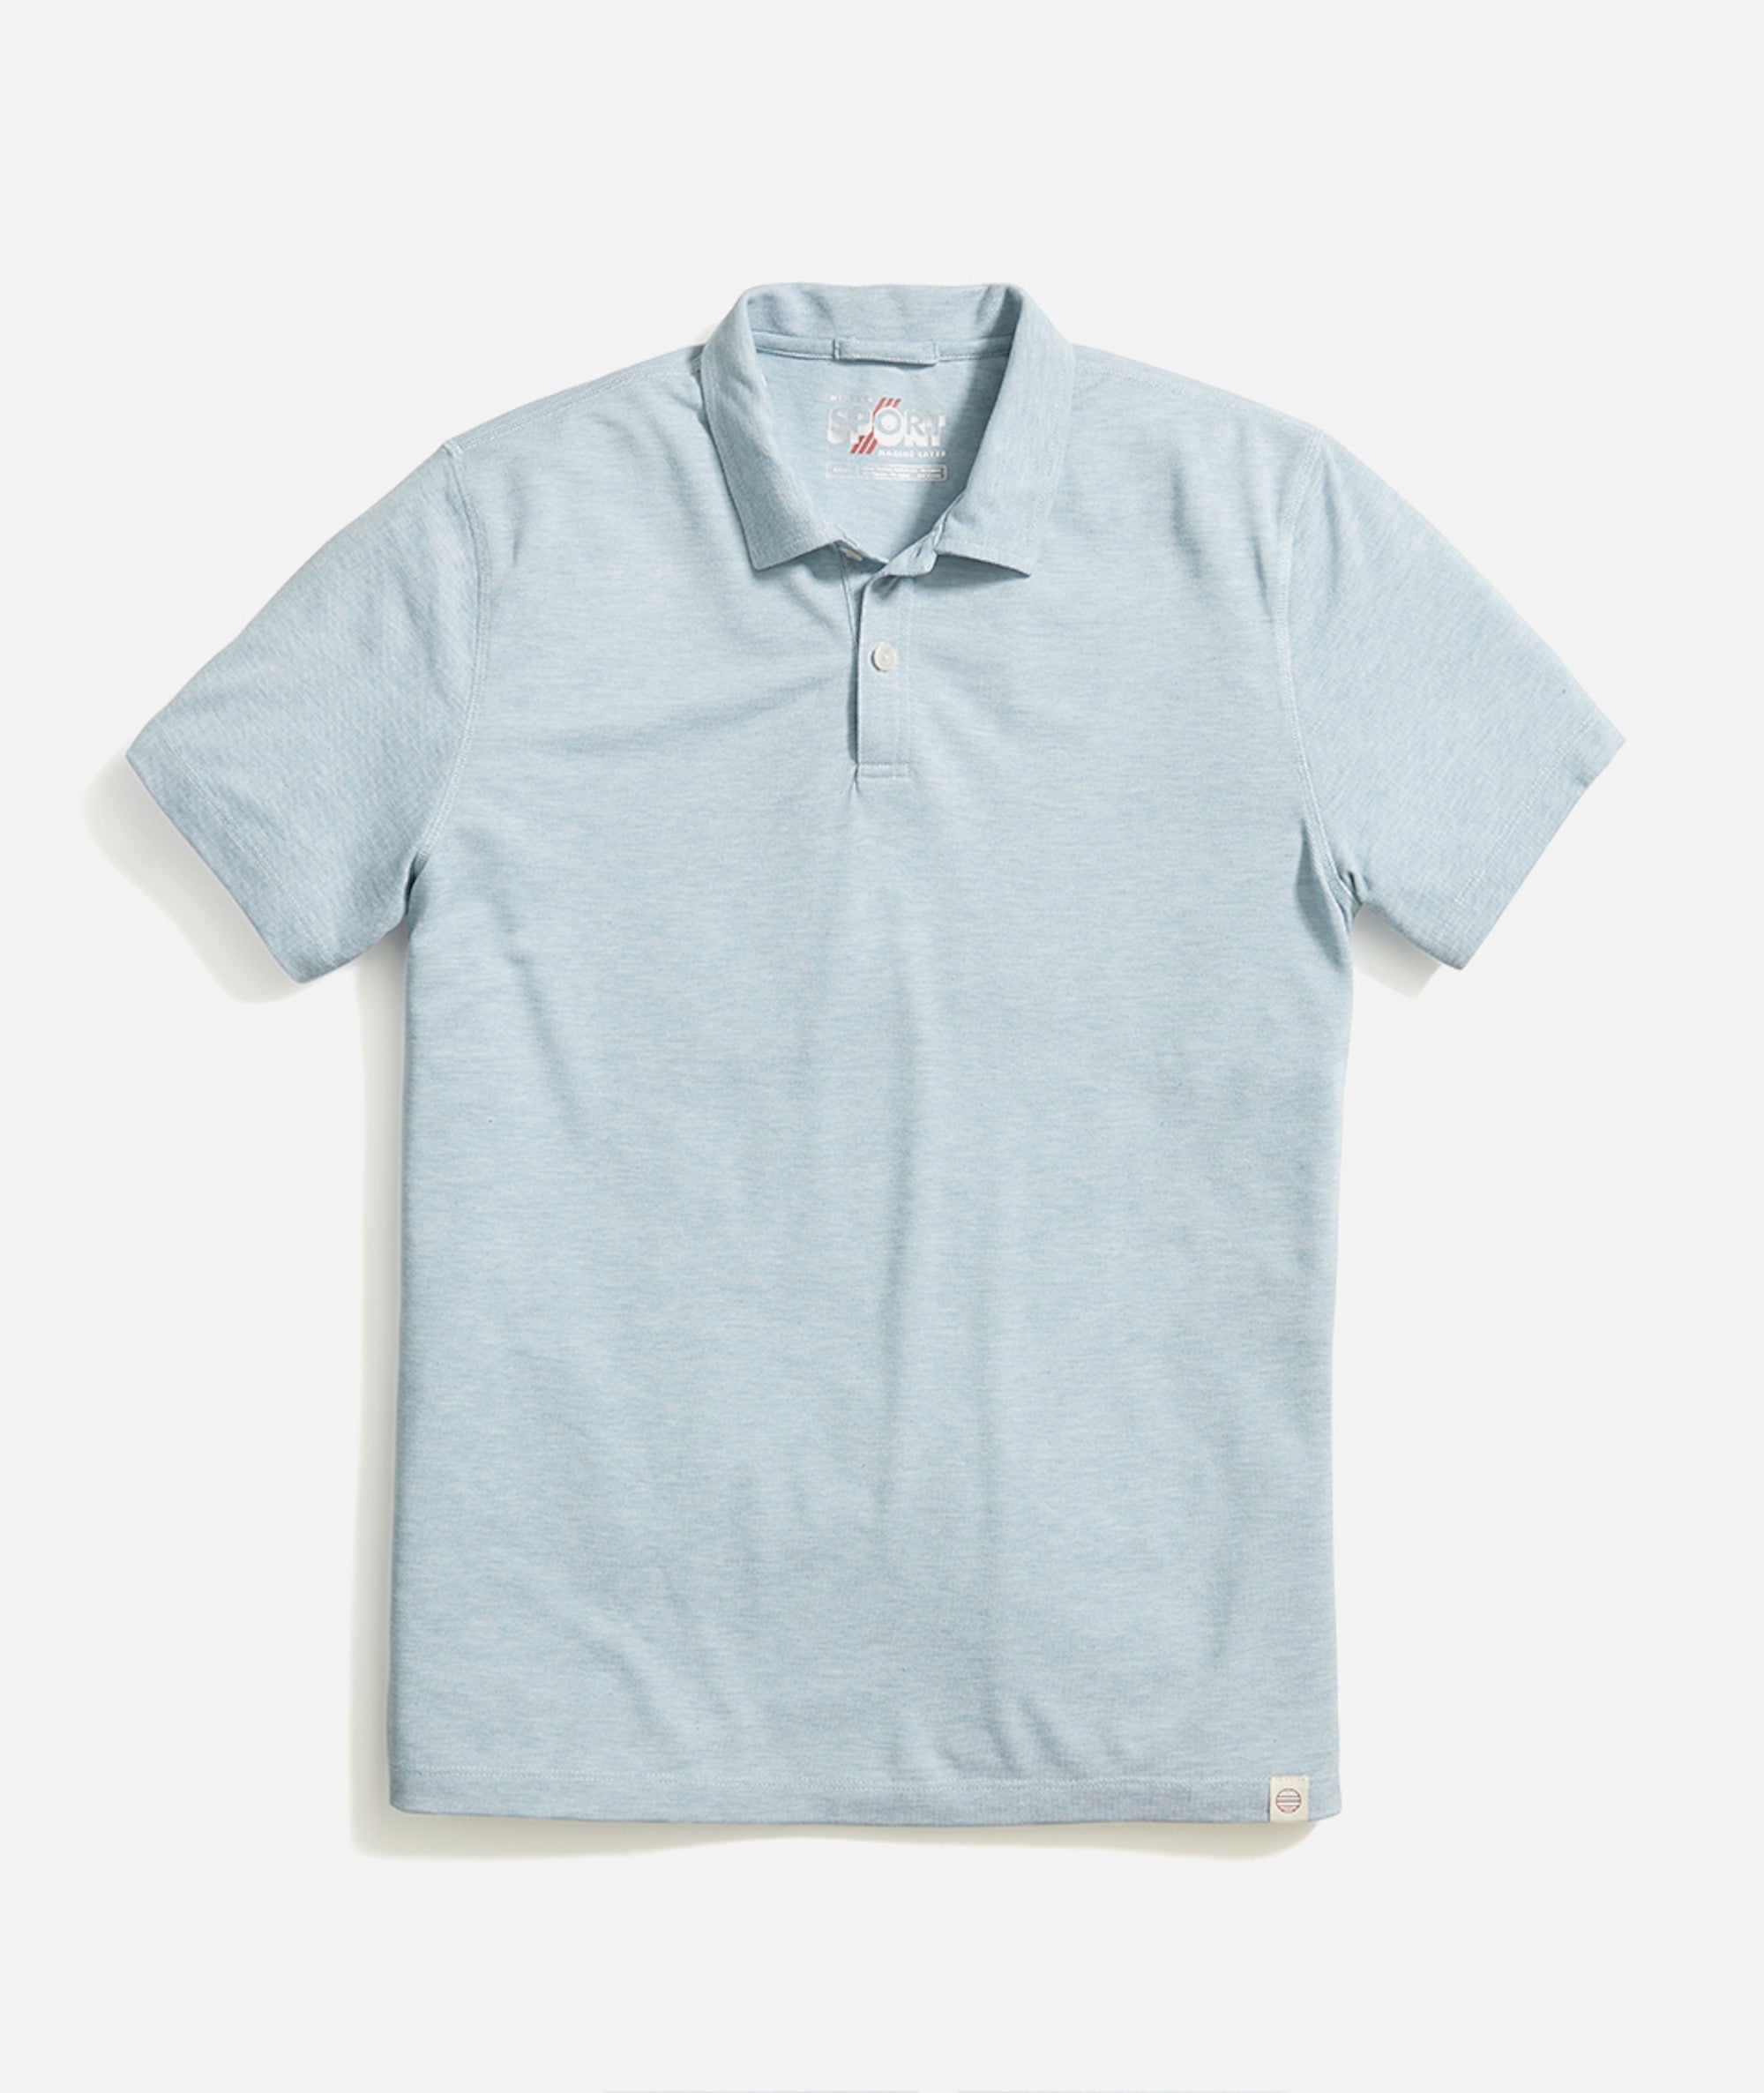 Cool Cotton Pique Polo China in Blue Layer Heather Marine –